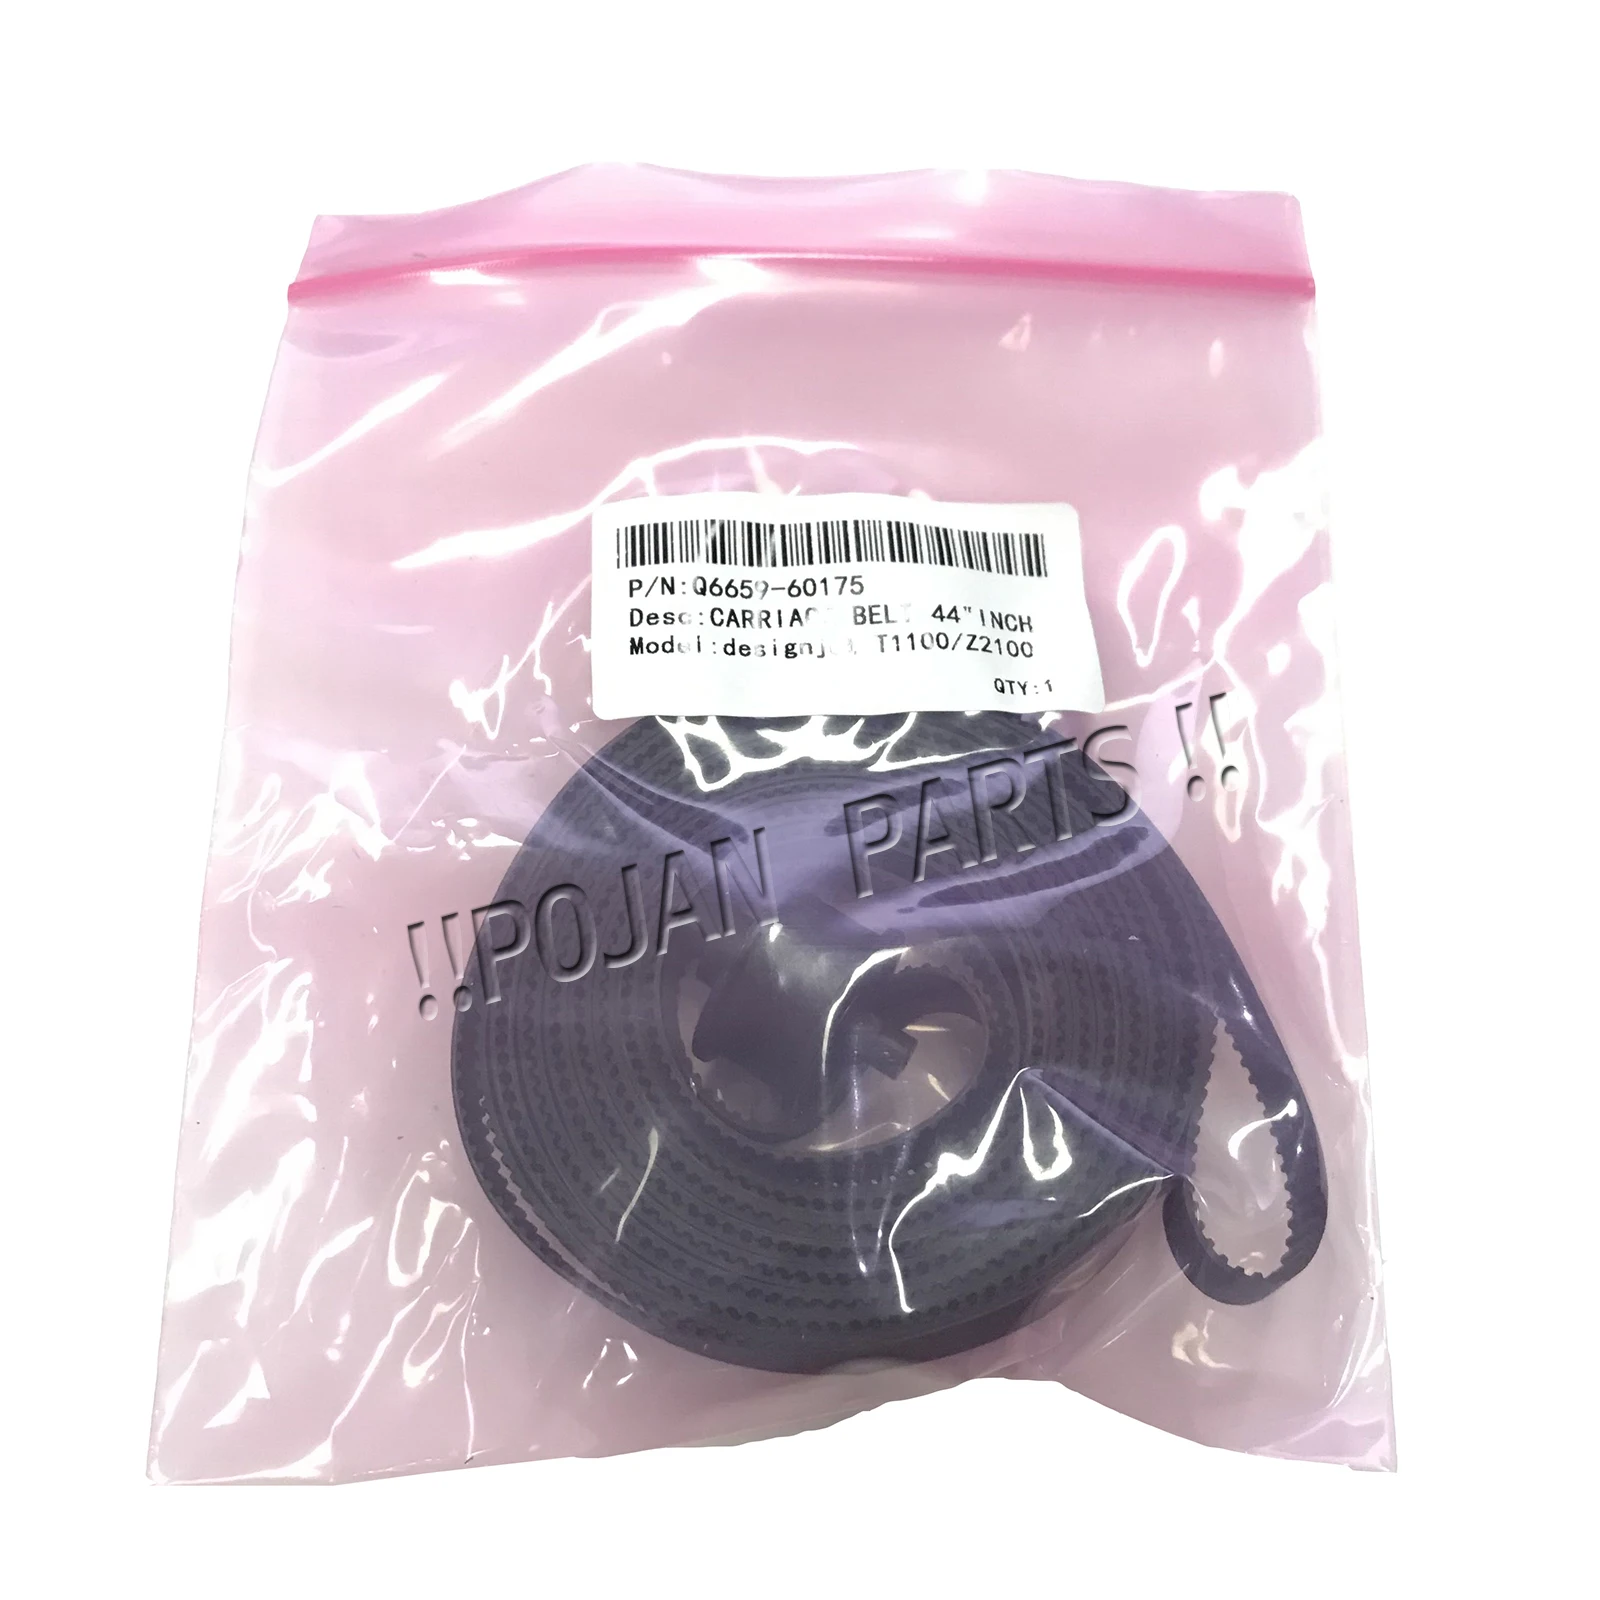 10X Carriage Belt Q6659-60175 Fit for Designjet T610 T1100 2100 3100 Z3200 PS 44'' plotter parts Free shipping POJAN Store